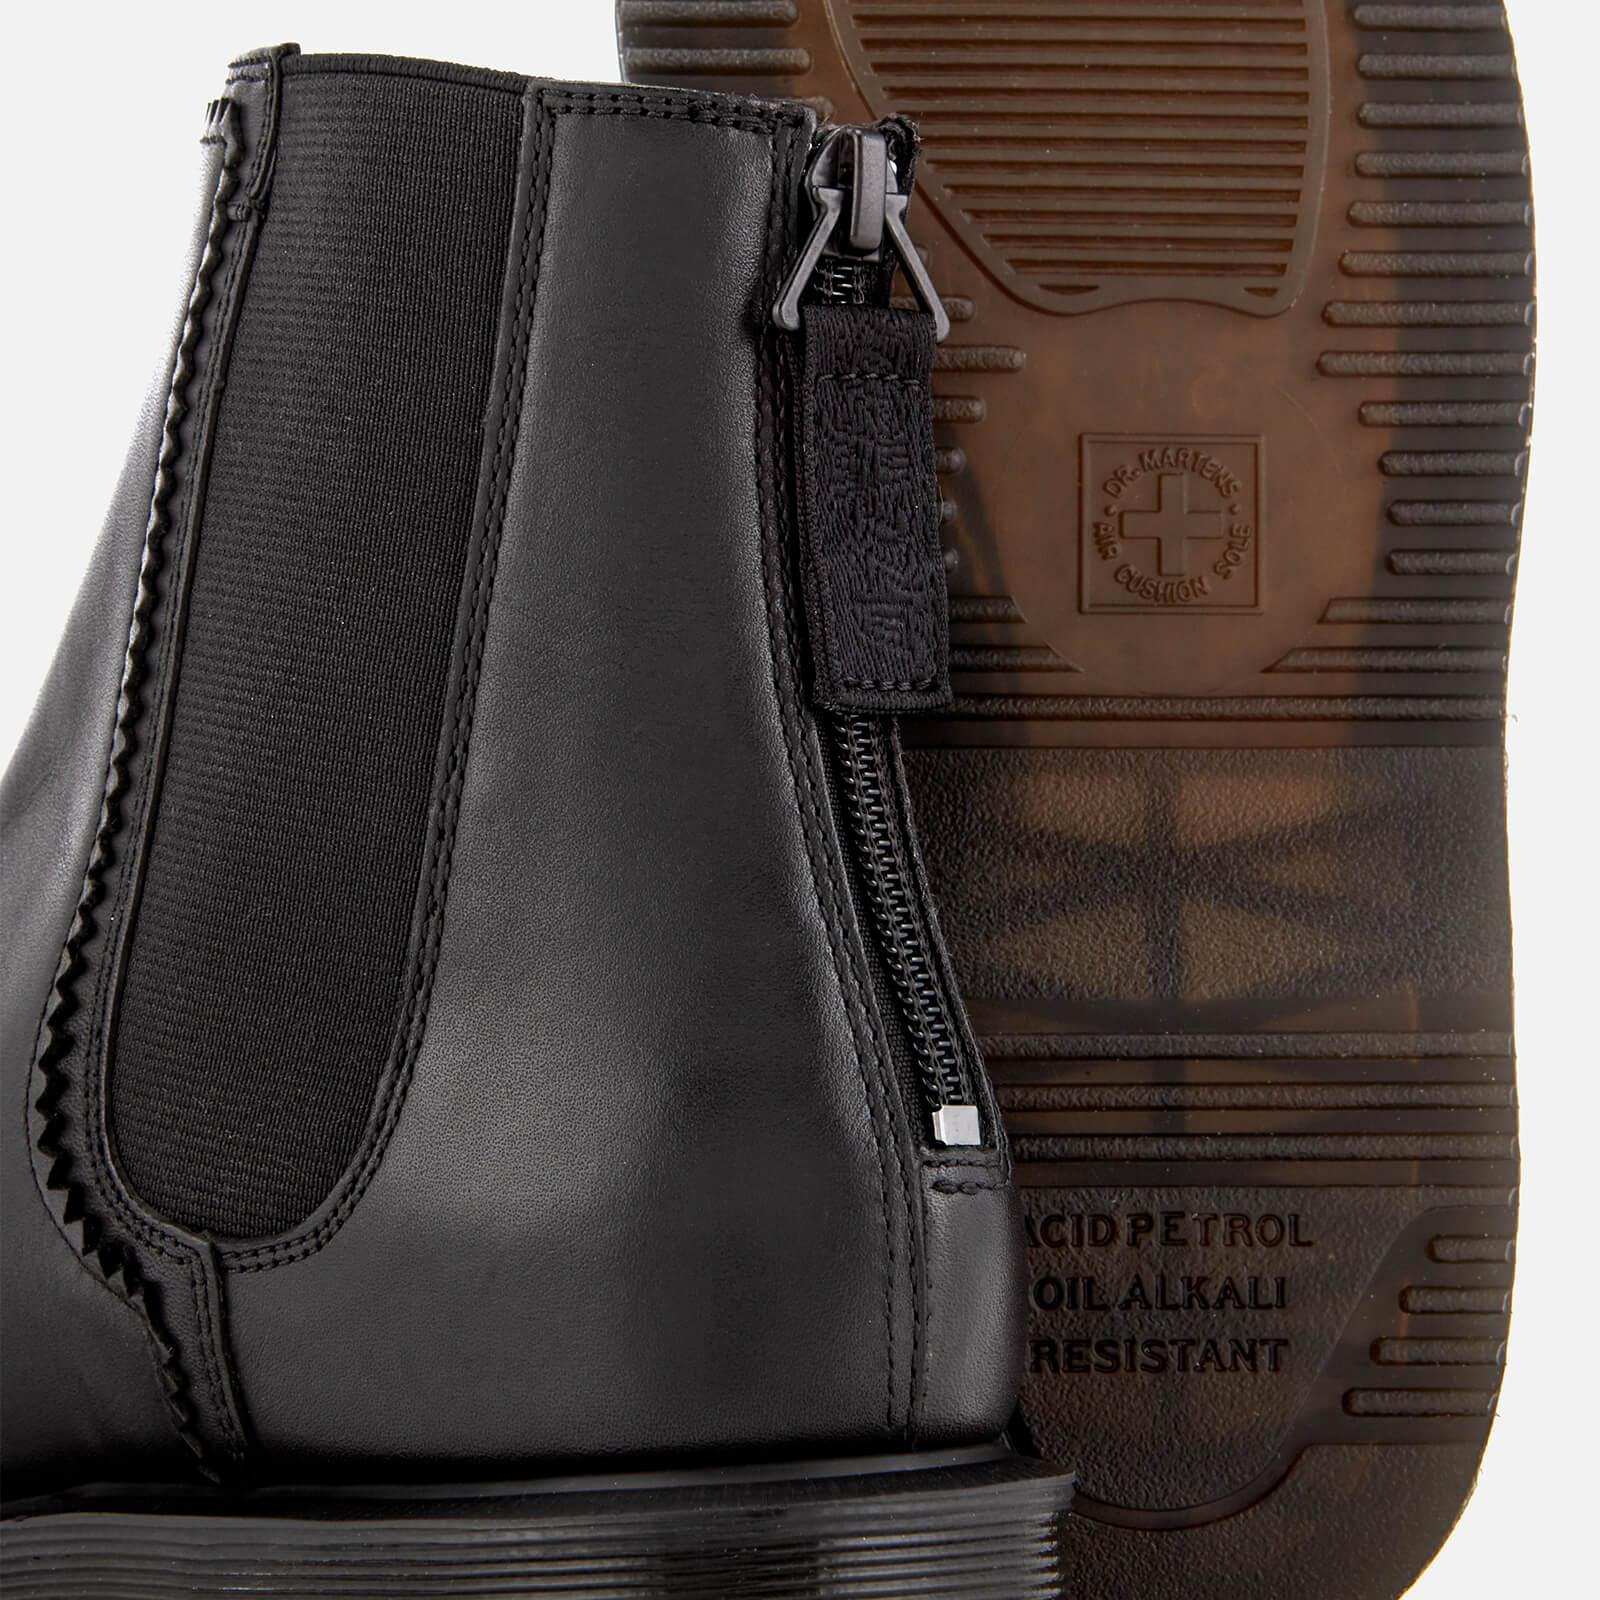 Dr. Martens Zillow Temperley Leather Zip Back Chelsea Boots in Black | Lyst  Australia